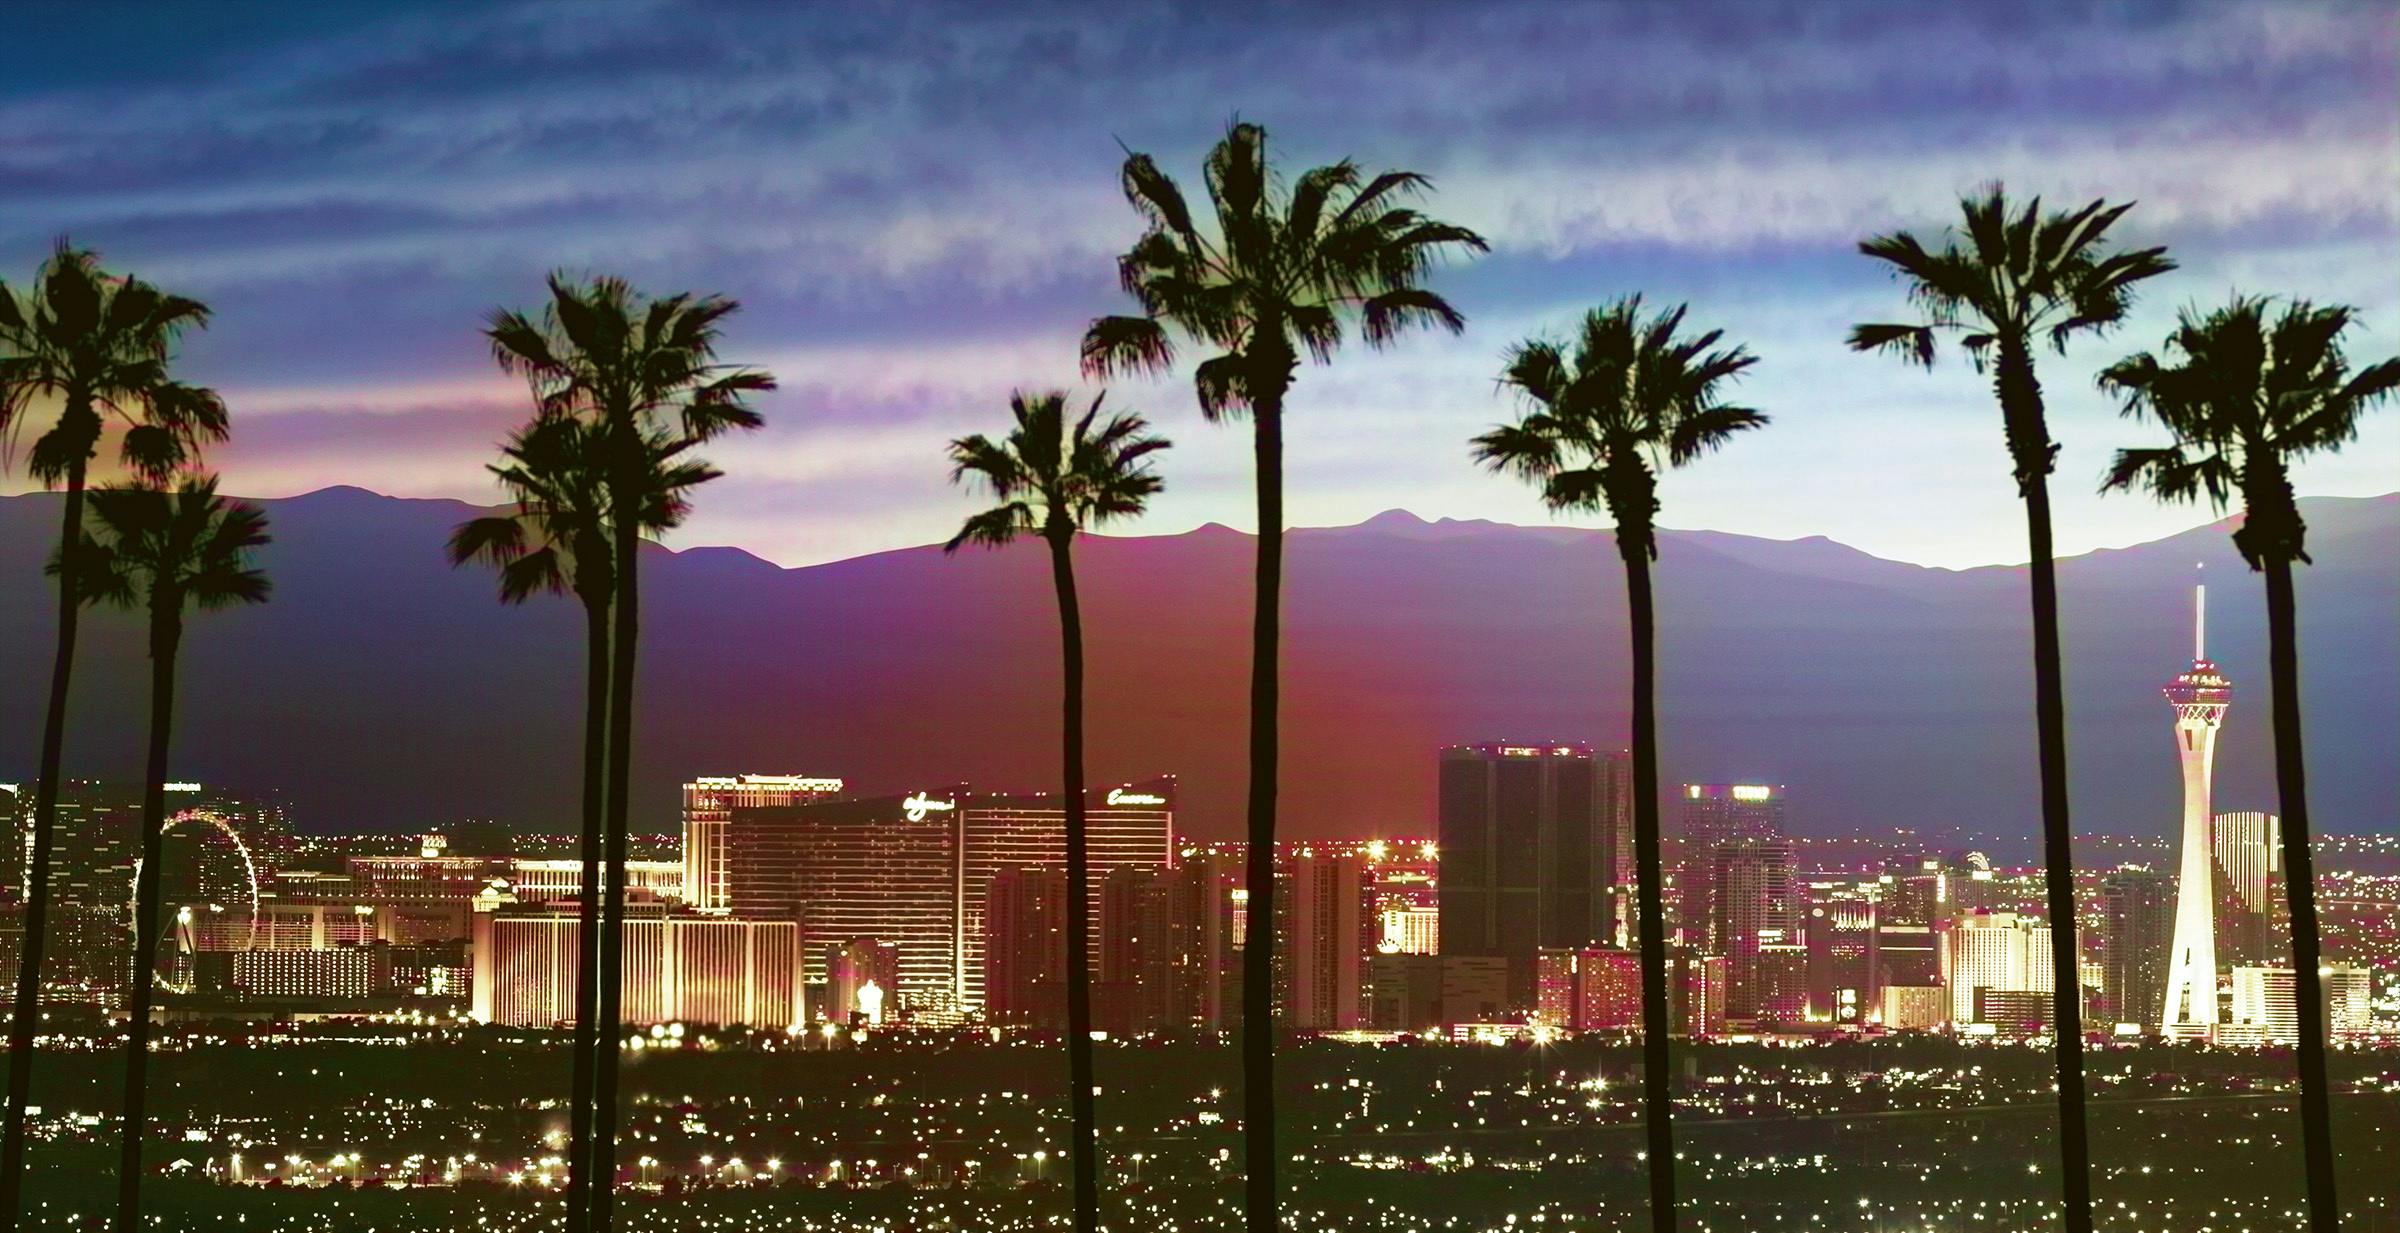 Palm trees in the foreground with the Las Vegas Strip in the background